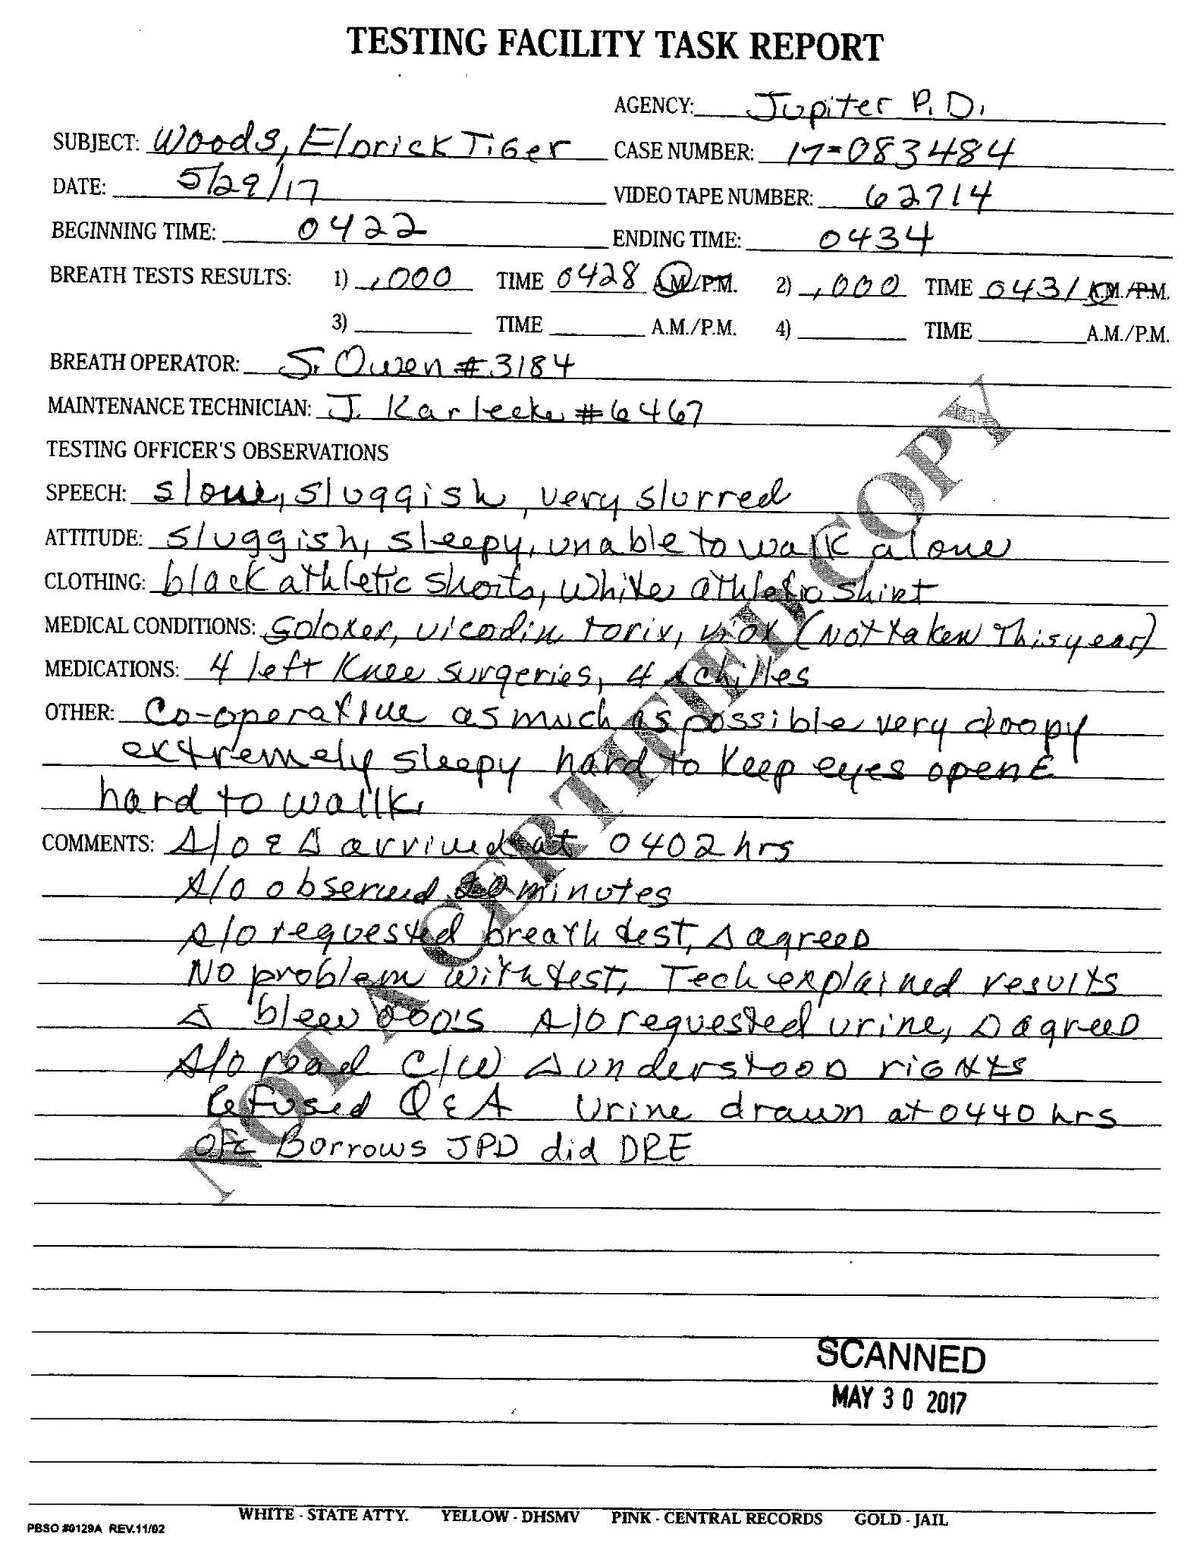 This document produced by the Jupiter Police Department on May 29, 2017 and published online by the Palm Beach County Court Clerk, shows a Testing Facility Task Report on Tiger Woods following his arrest in Florida on suspicion of driving under the influence. The report lists four medications, including Vicodin, that Woods said he was taking when he was stopped for DUI.